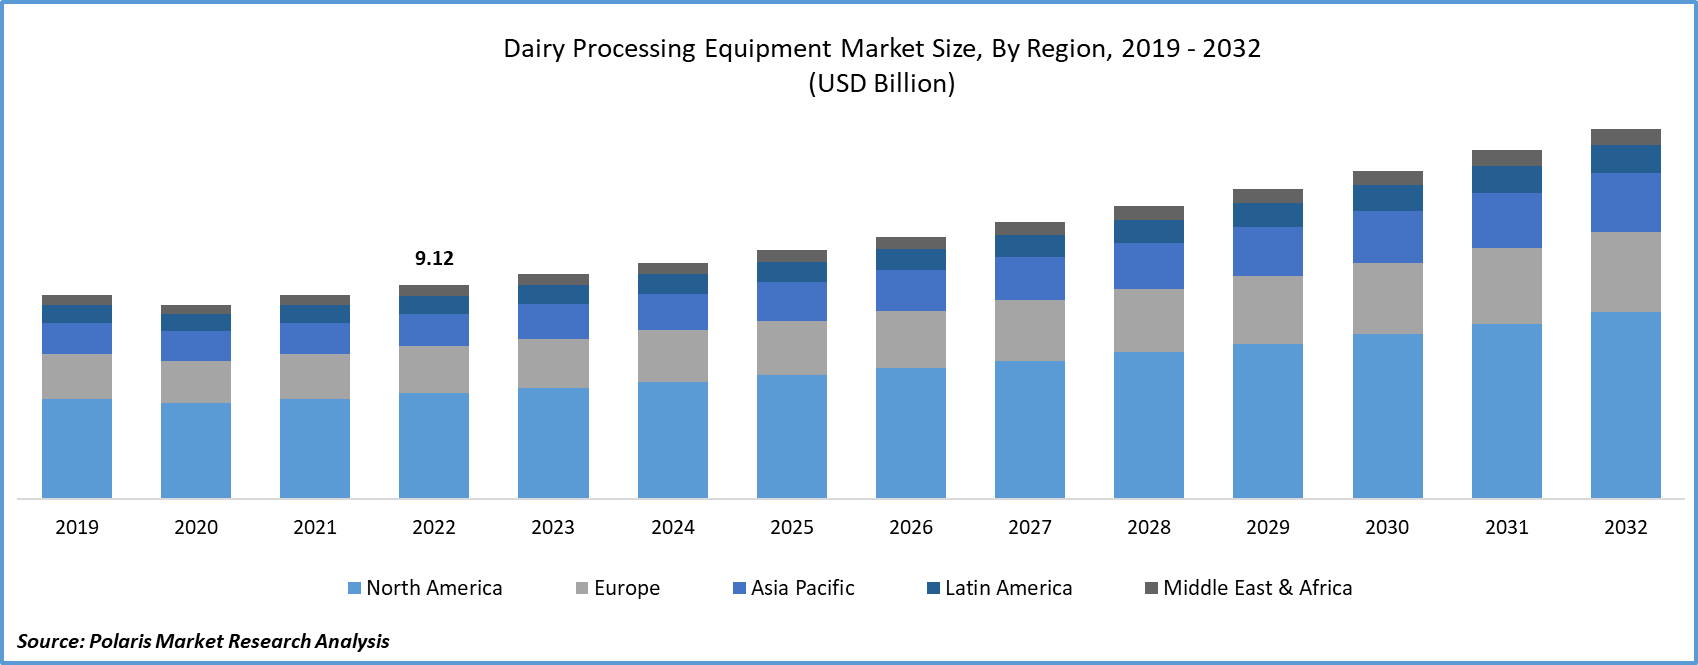 Dairy Processing Equipment’s Market Size